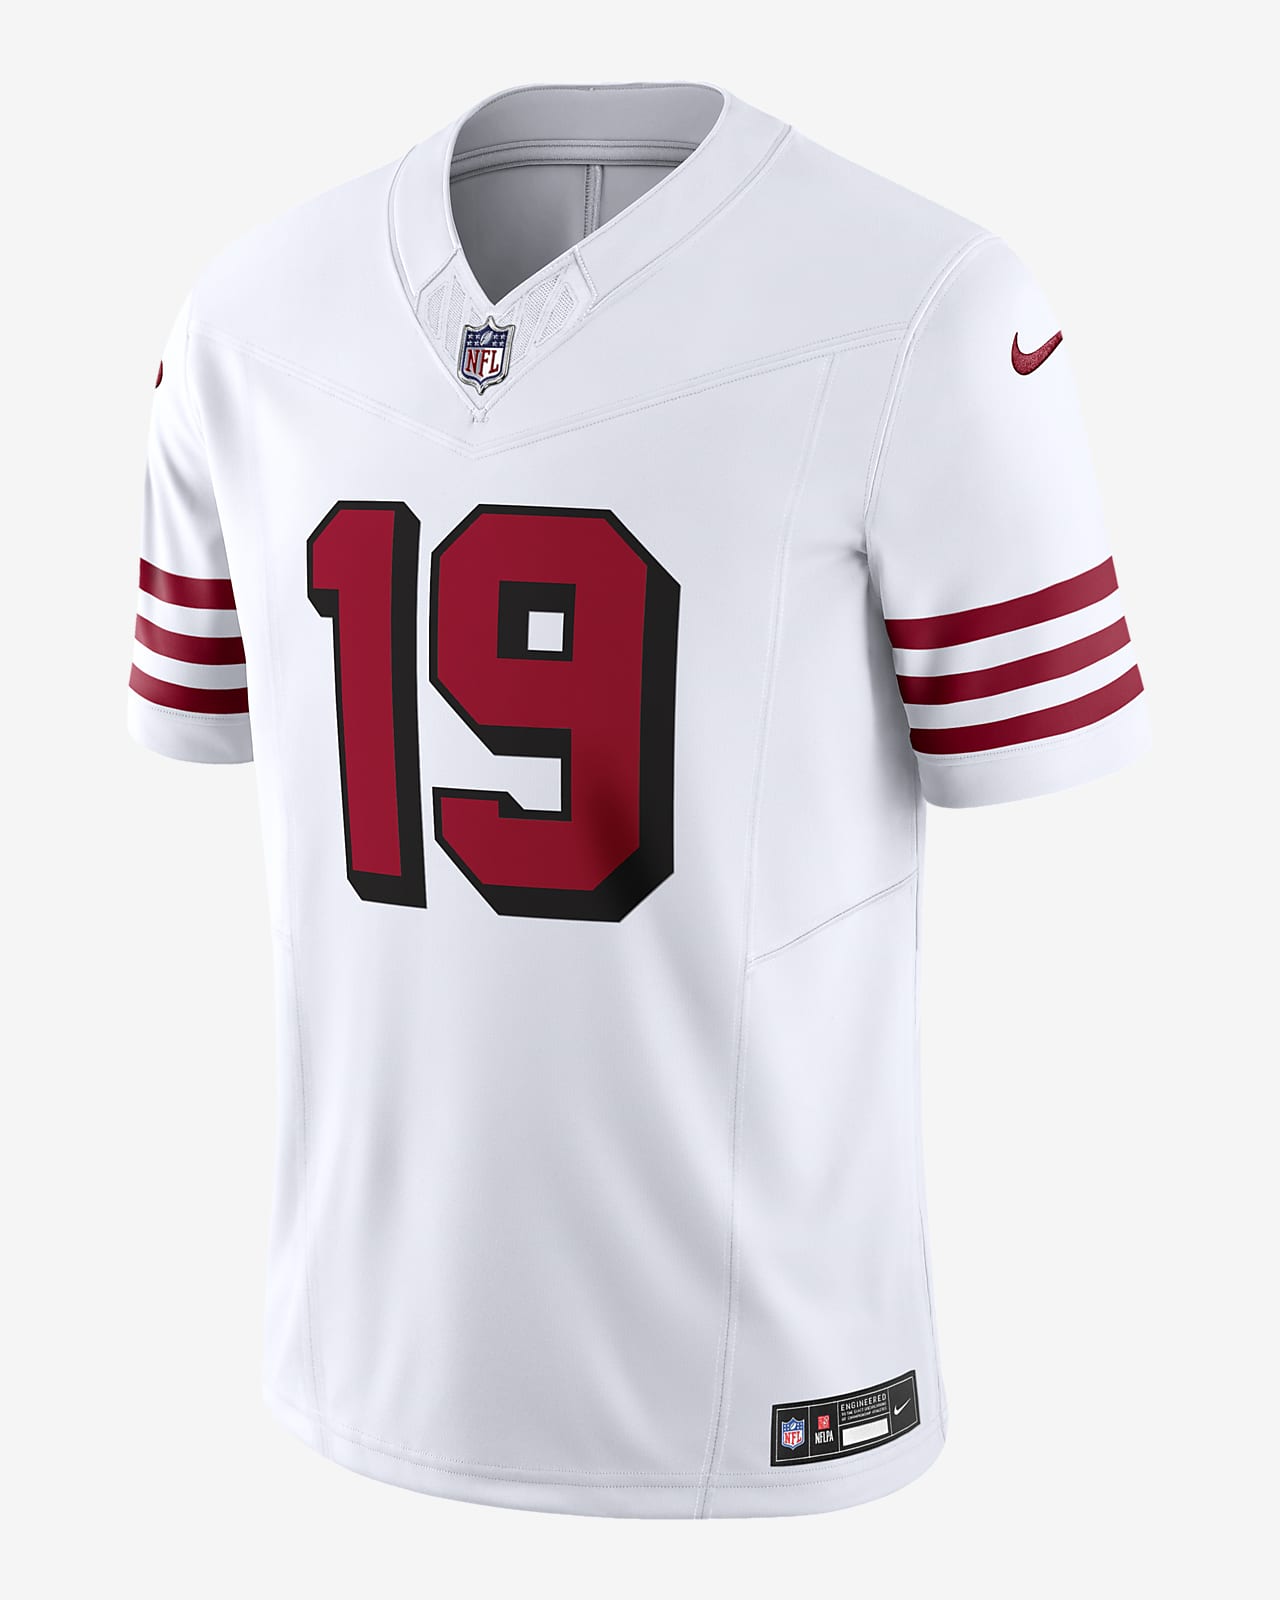 jersey sf 49ers